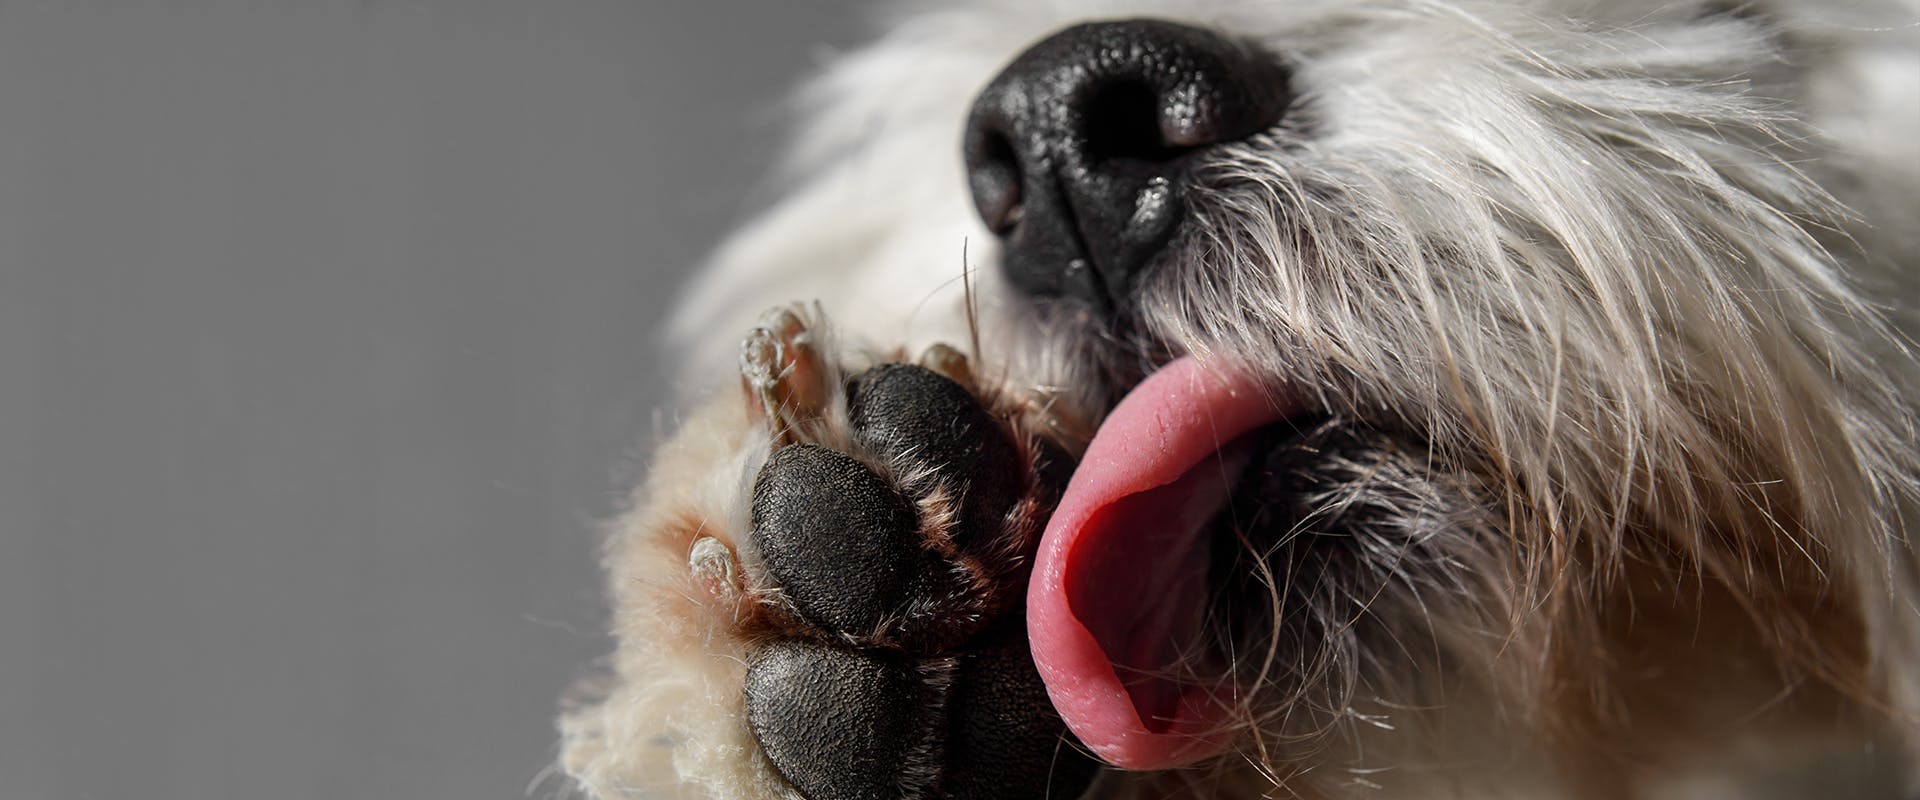 A close up of a dog licking its paw